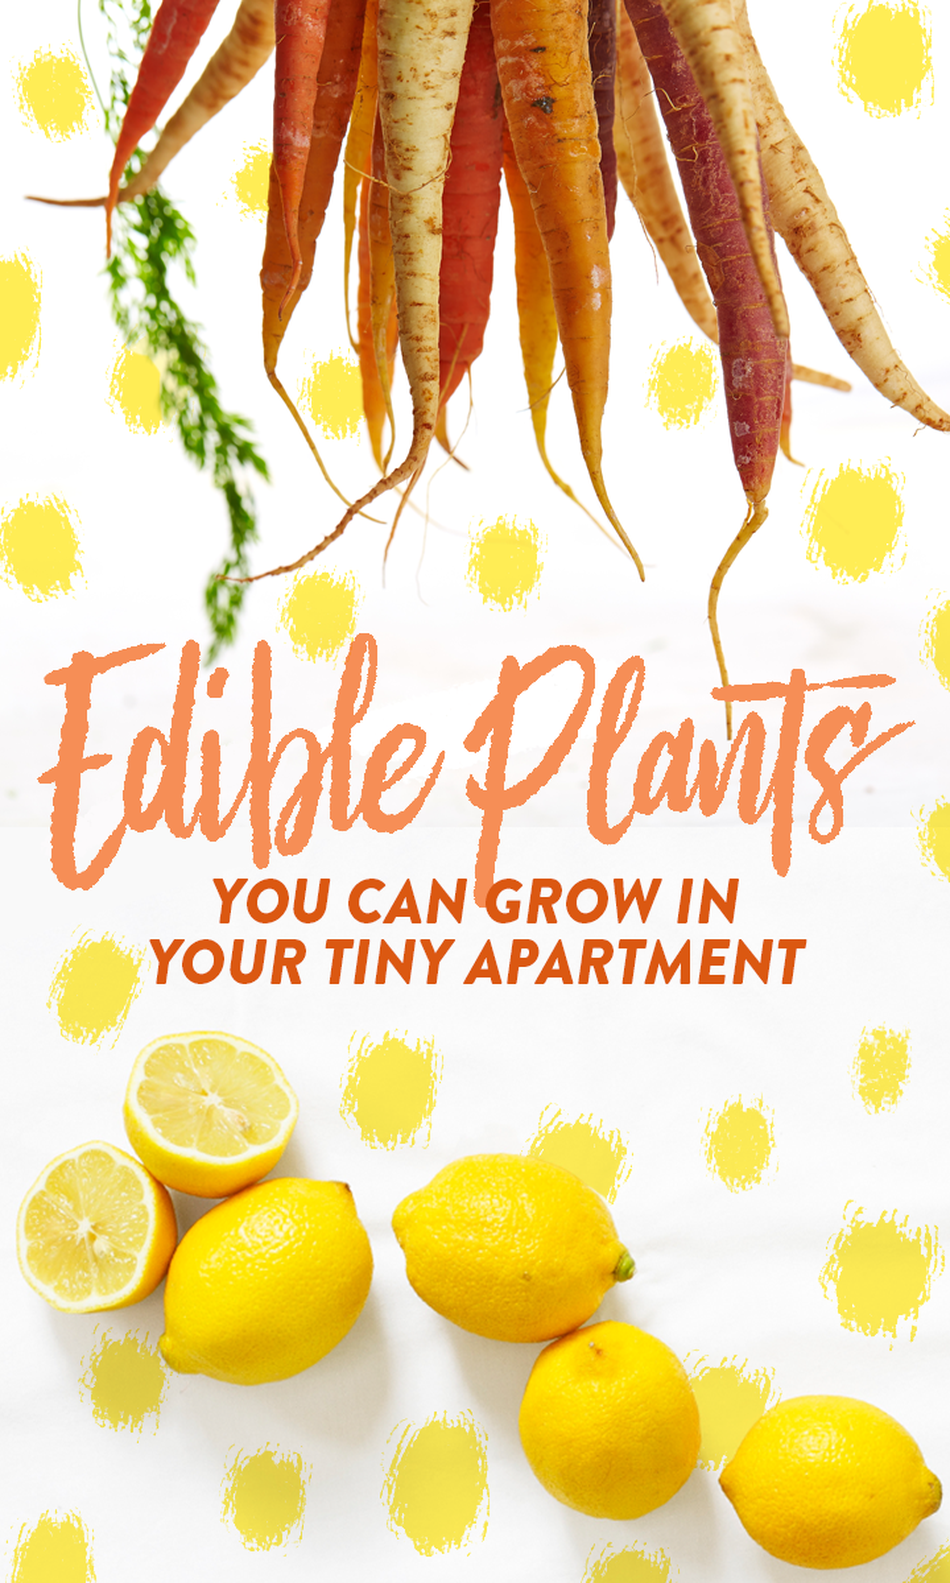 15 edible plants you can grow in your tiny apartment -   18 plants Apartment beautiful ideas